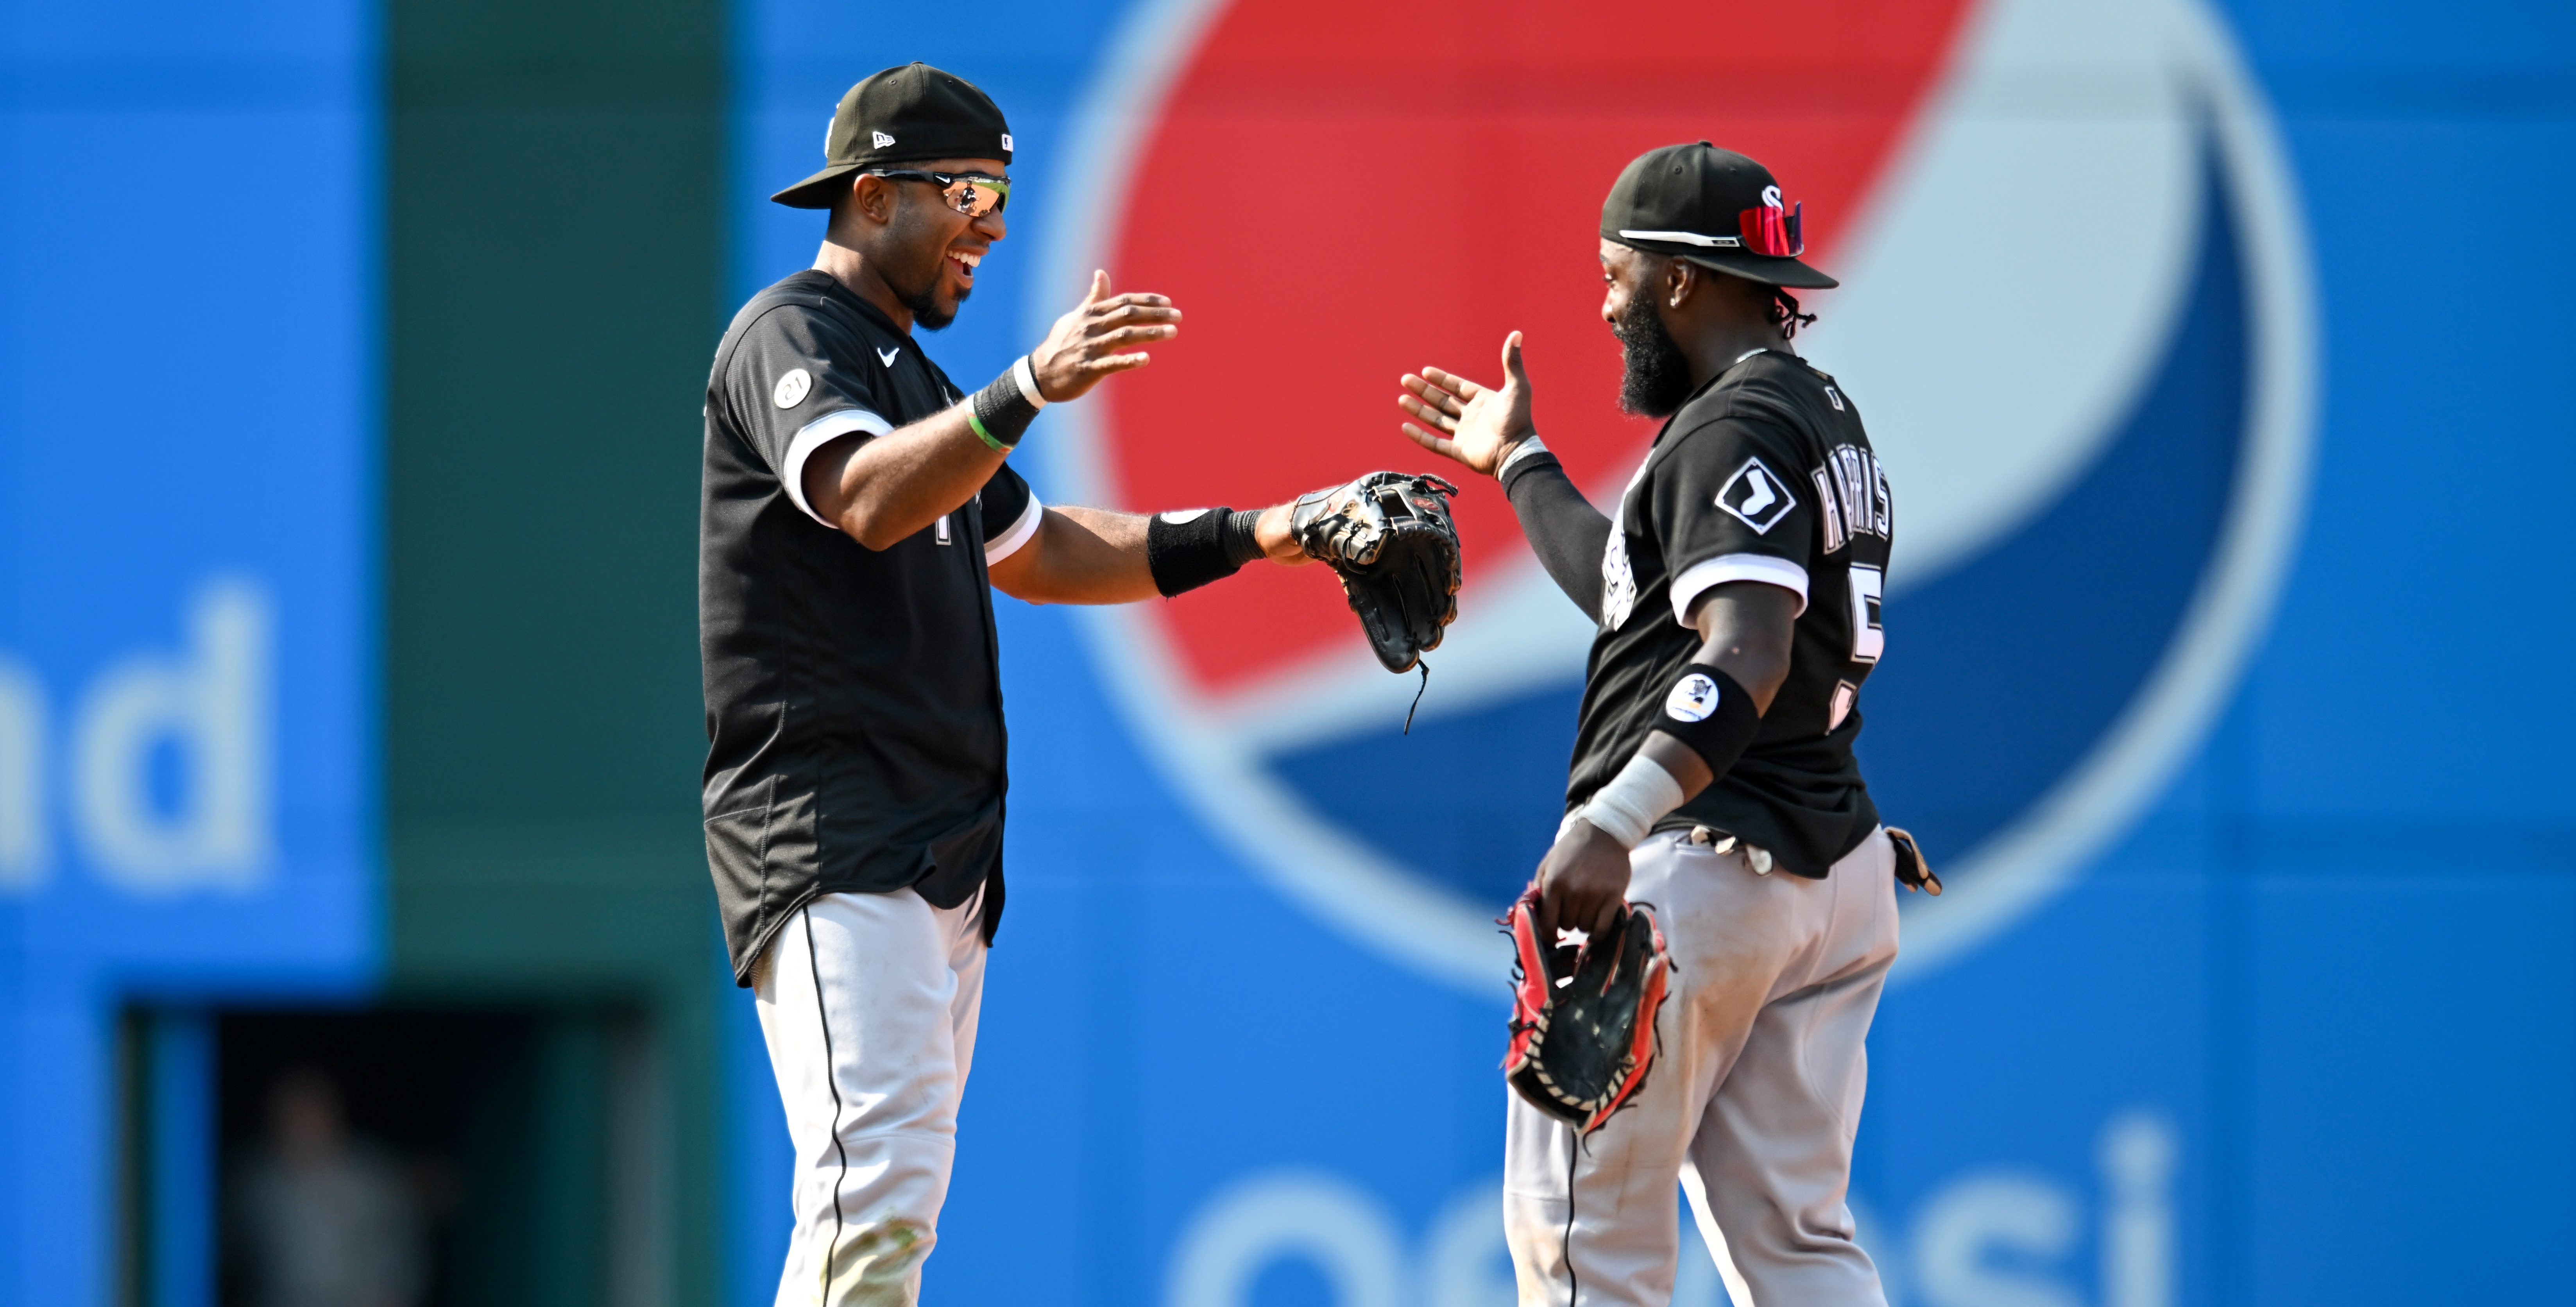 Free-agent infielder Elvis Andrus returning to White Sox on 1-year